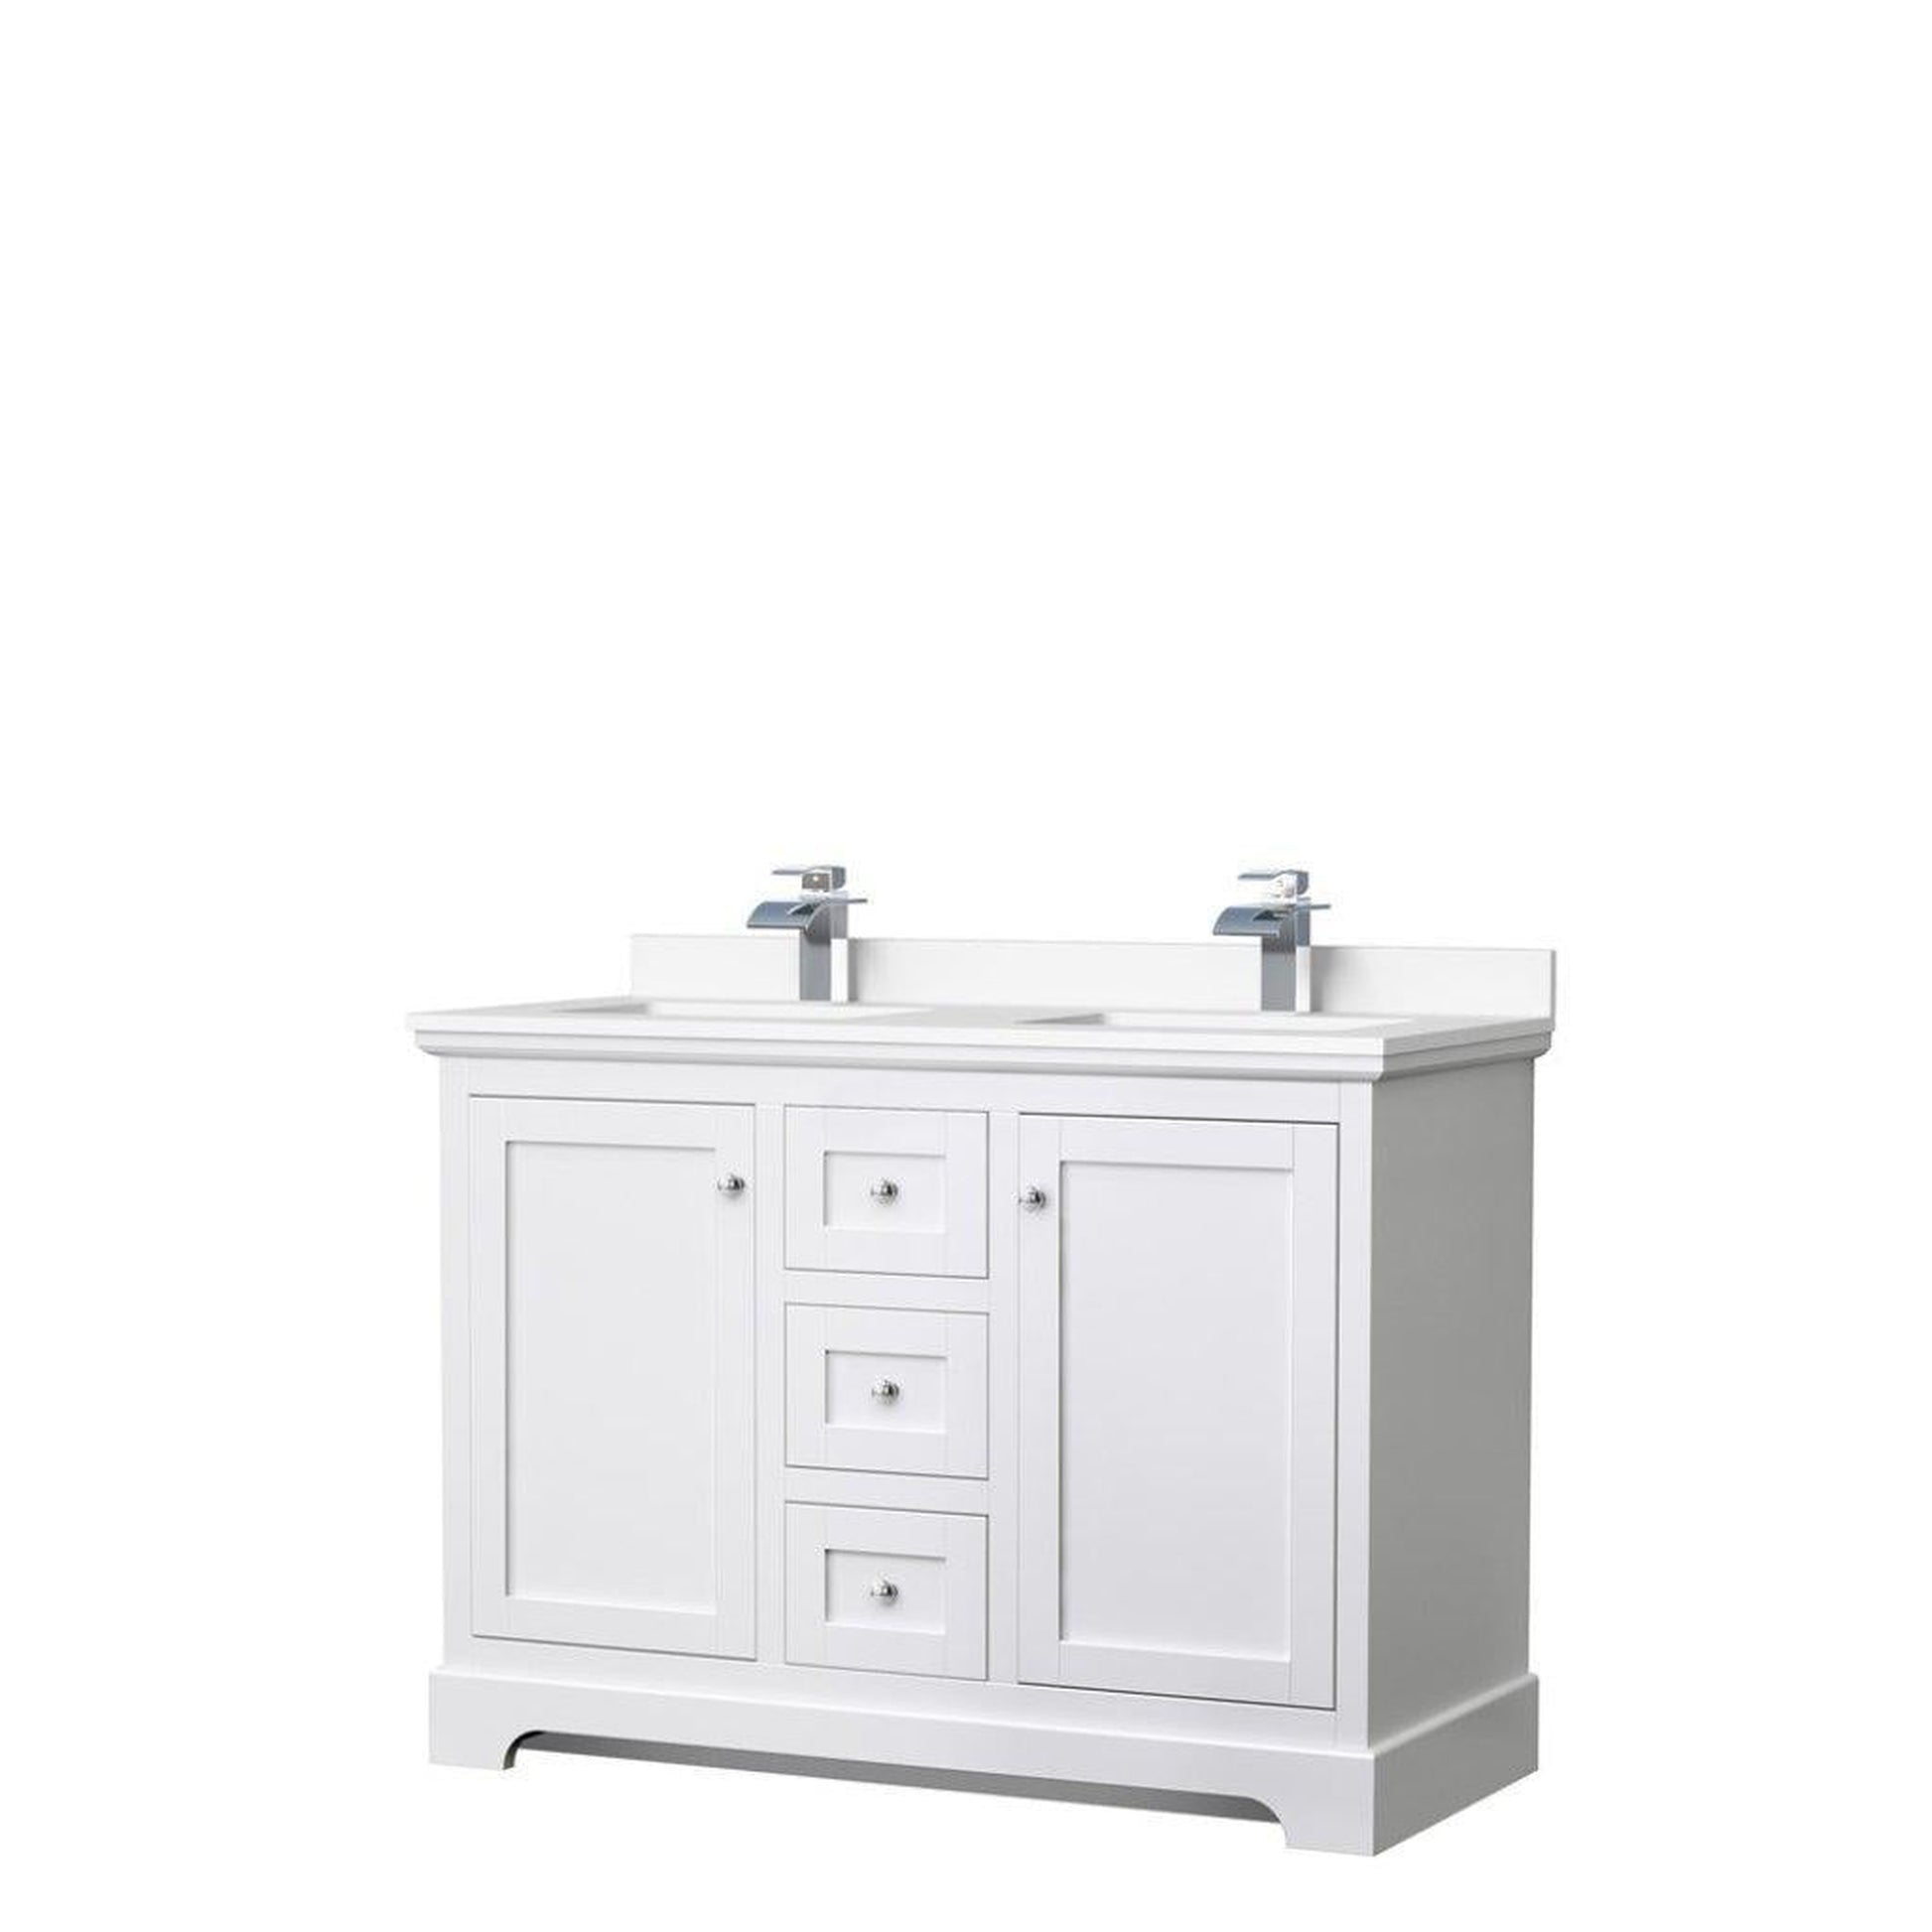 Wyndham Collection Avery 48" White Double Bathroom Vanity, White Cultured Marble Countertop With 1-Hole Faucet, Square Sink, Polished Chrome Trims